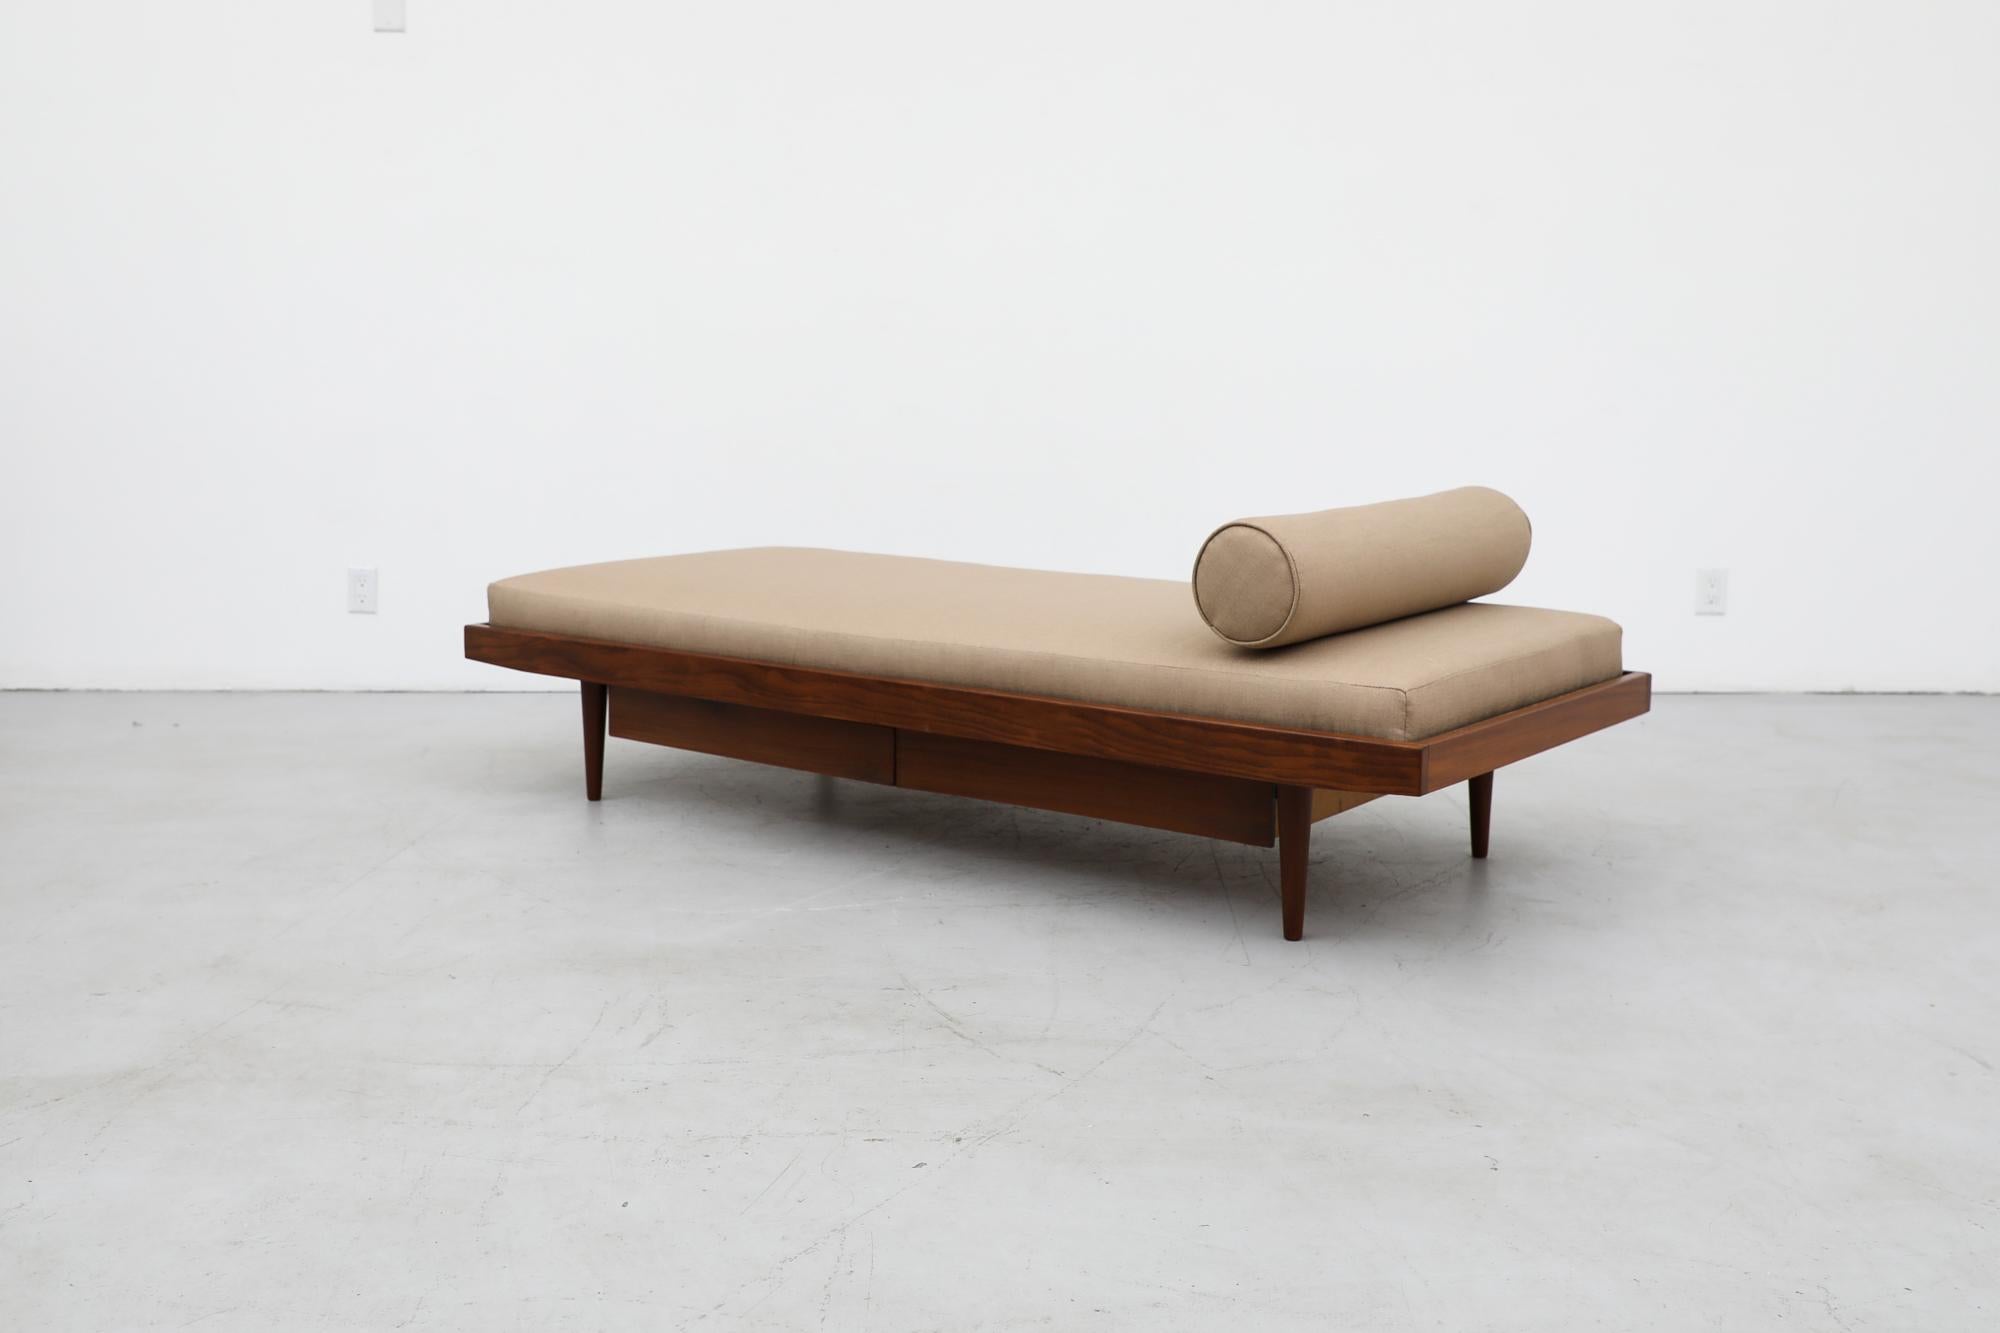 Upholstery Midcentury Pierre Chapo Inspired Teak Daybed with Storage Drawers